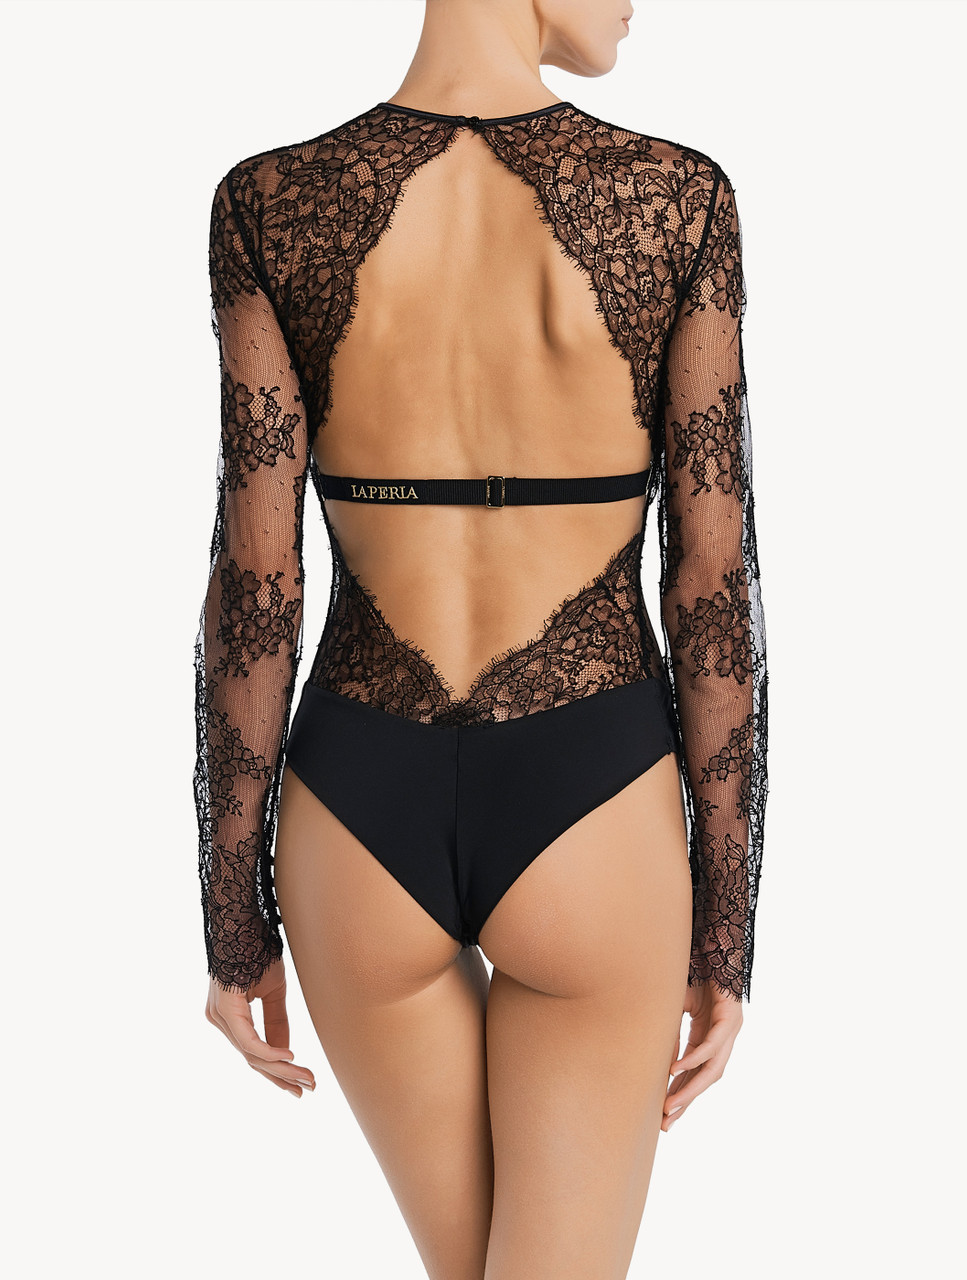 Womens Wanderlust Lace Bodysuit in Black size X-Large by Fashion